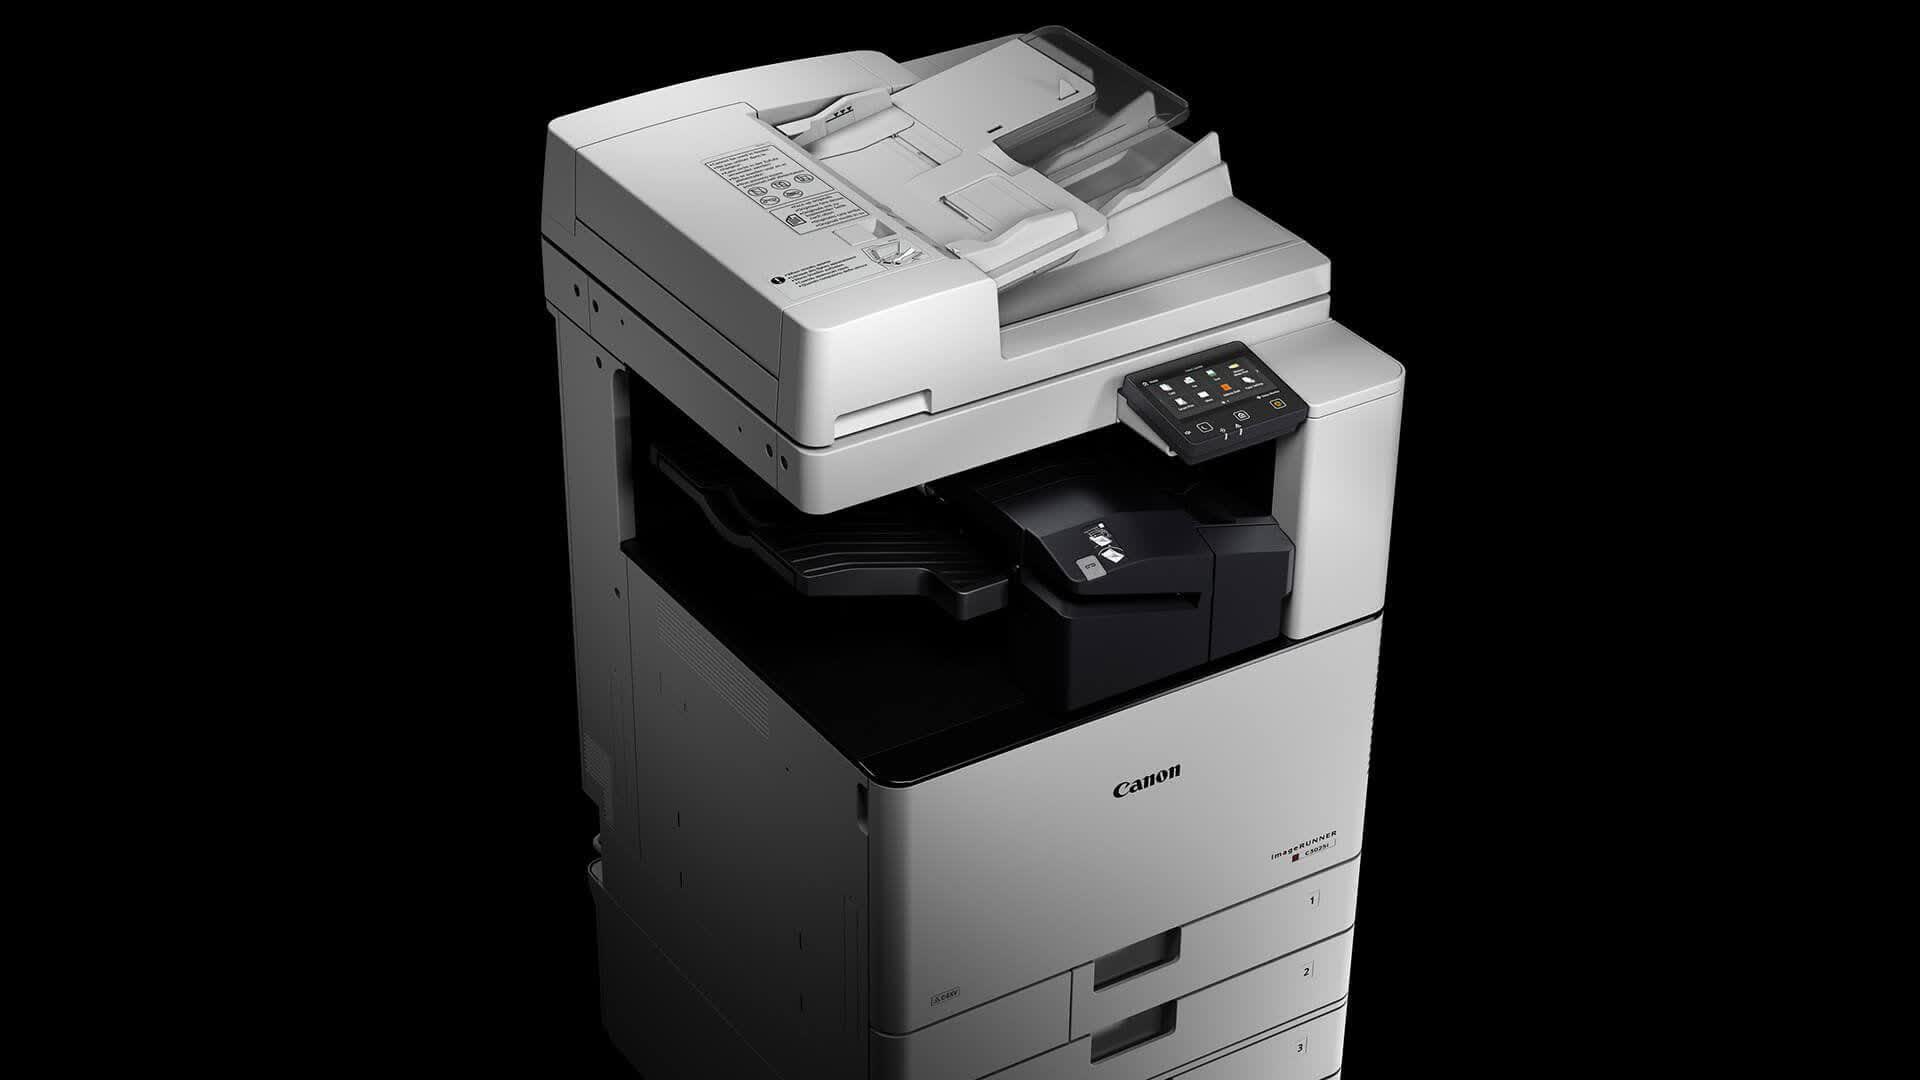 Canon printer owners get official guidance to bypass DRM as company is forced to sell chip-less toners